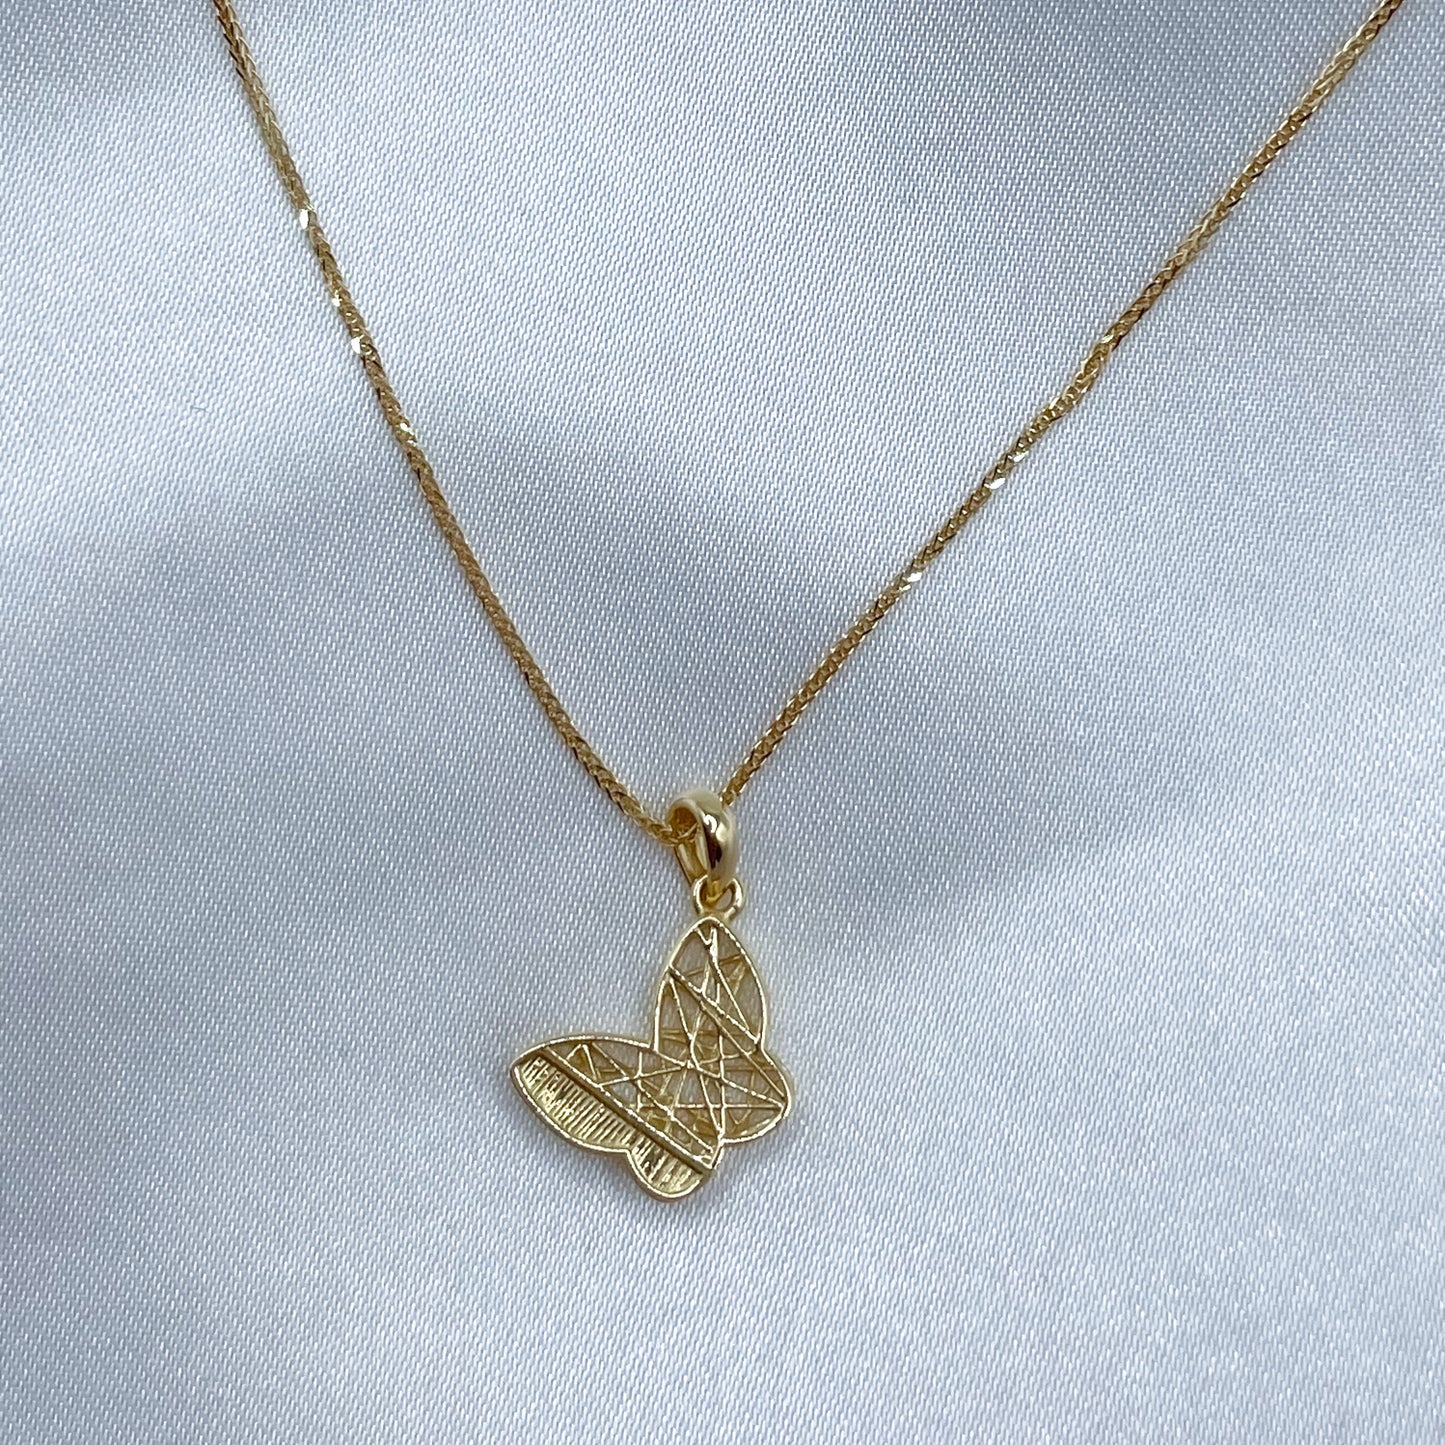 18K Resilience Butterfly Necklace